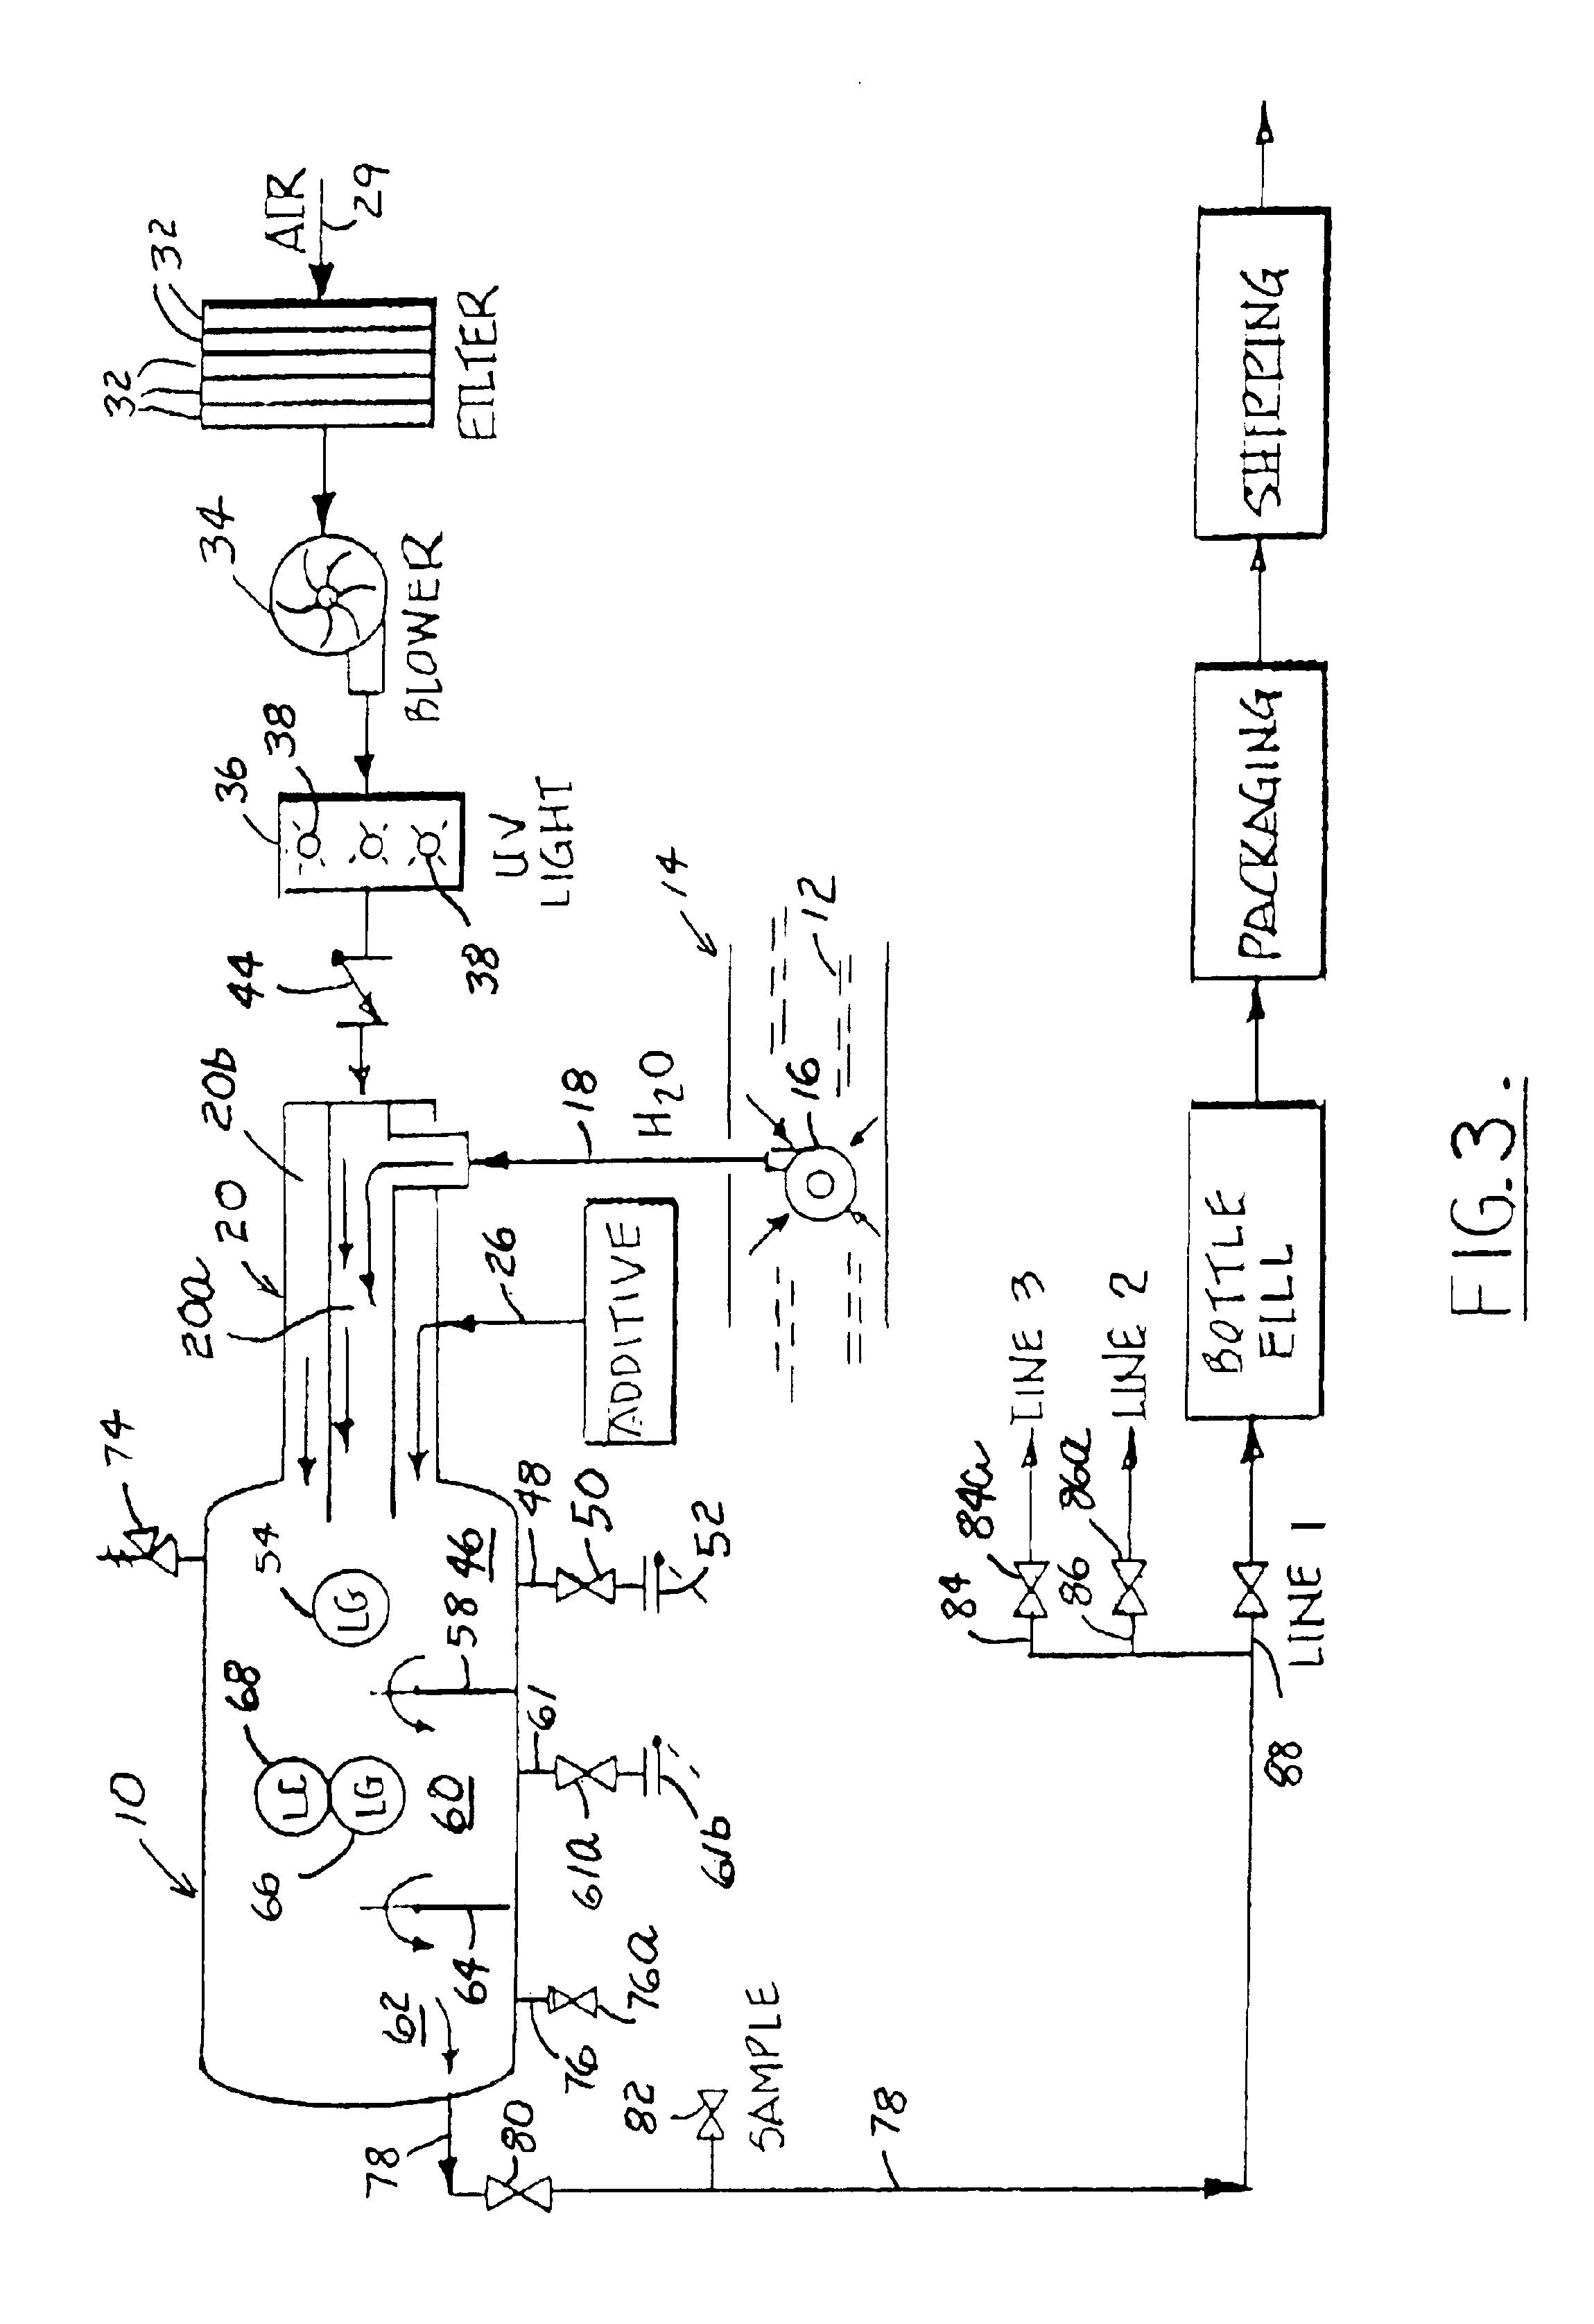 Method and apparatus for adding oxygen to drinking water